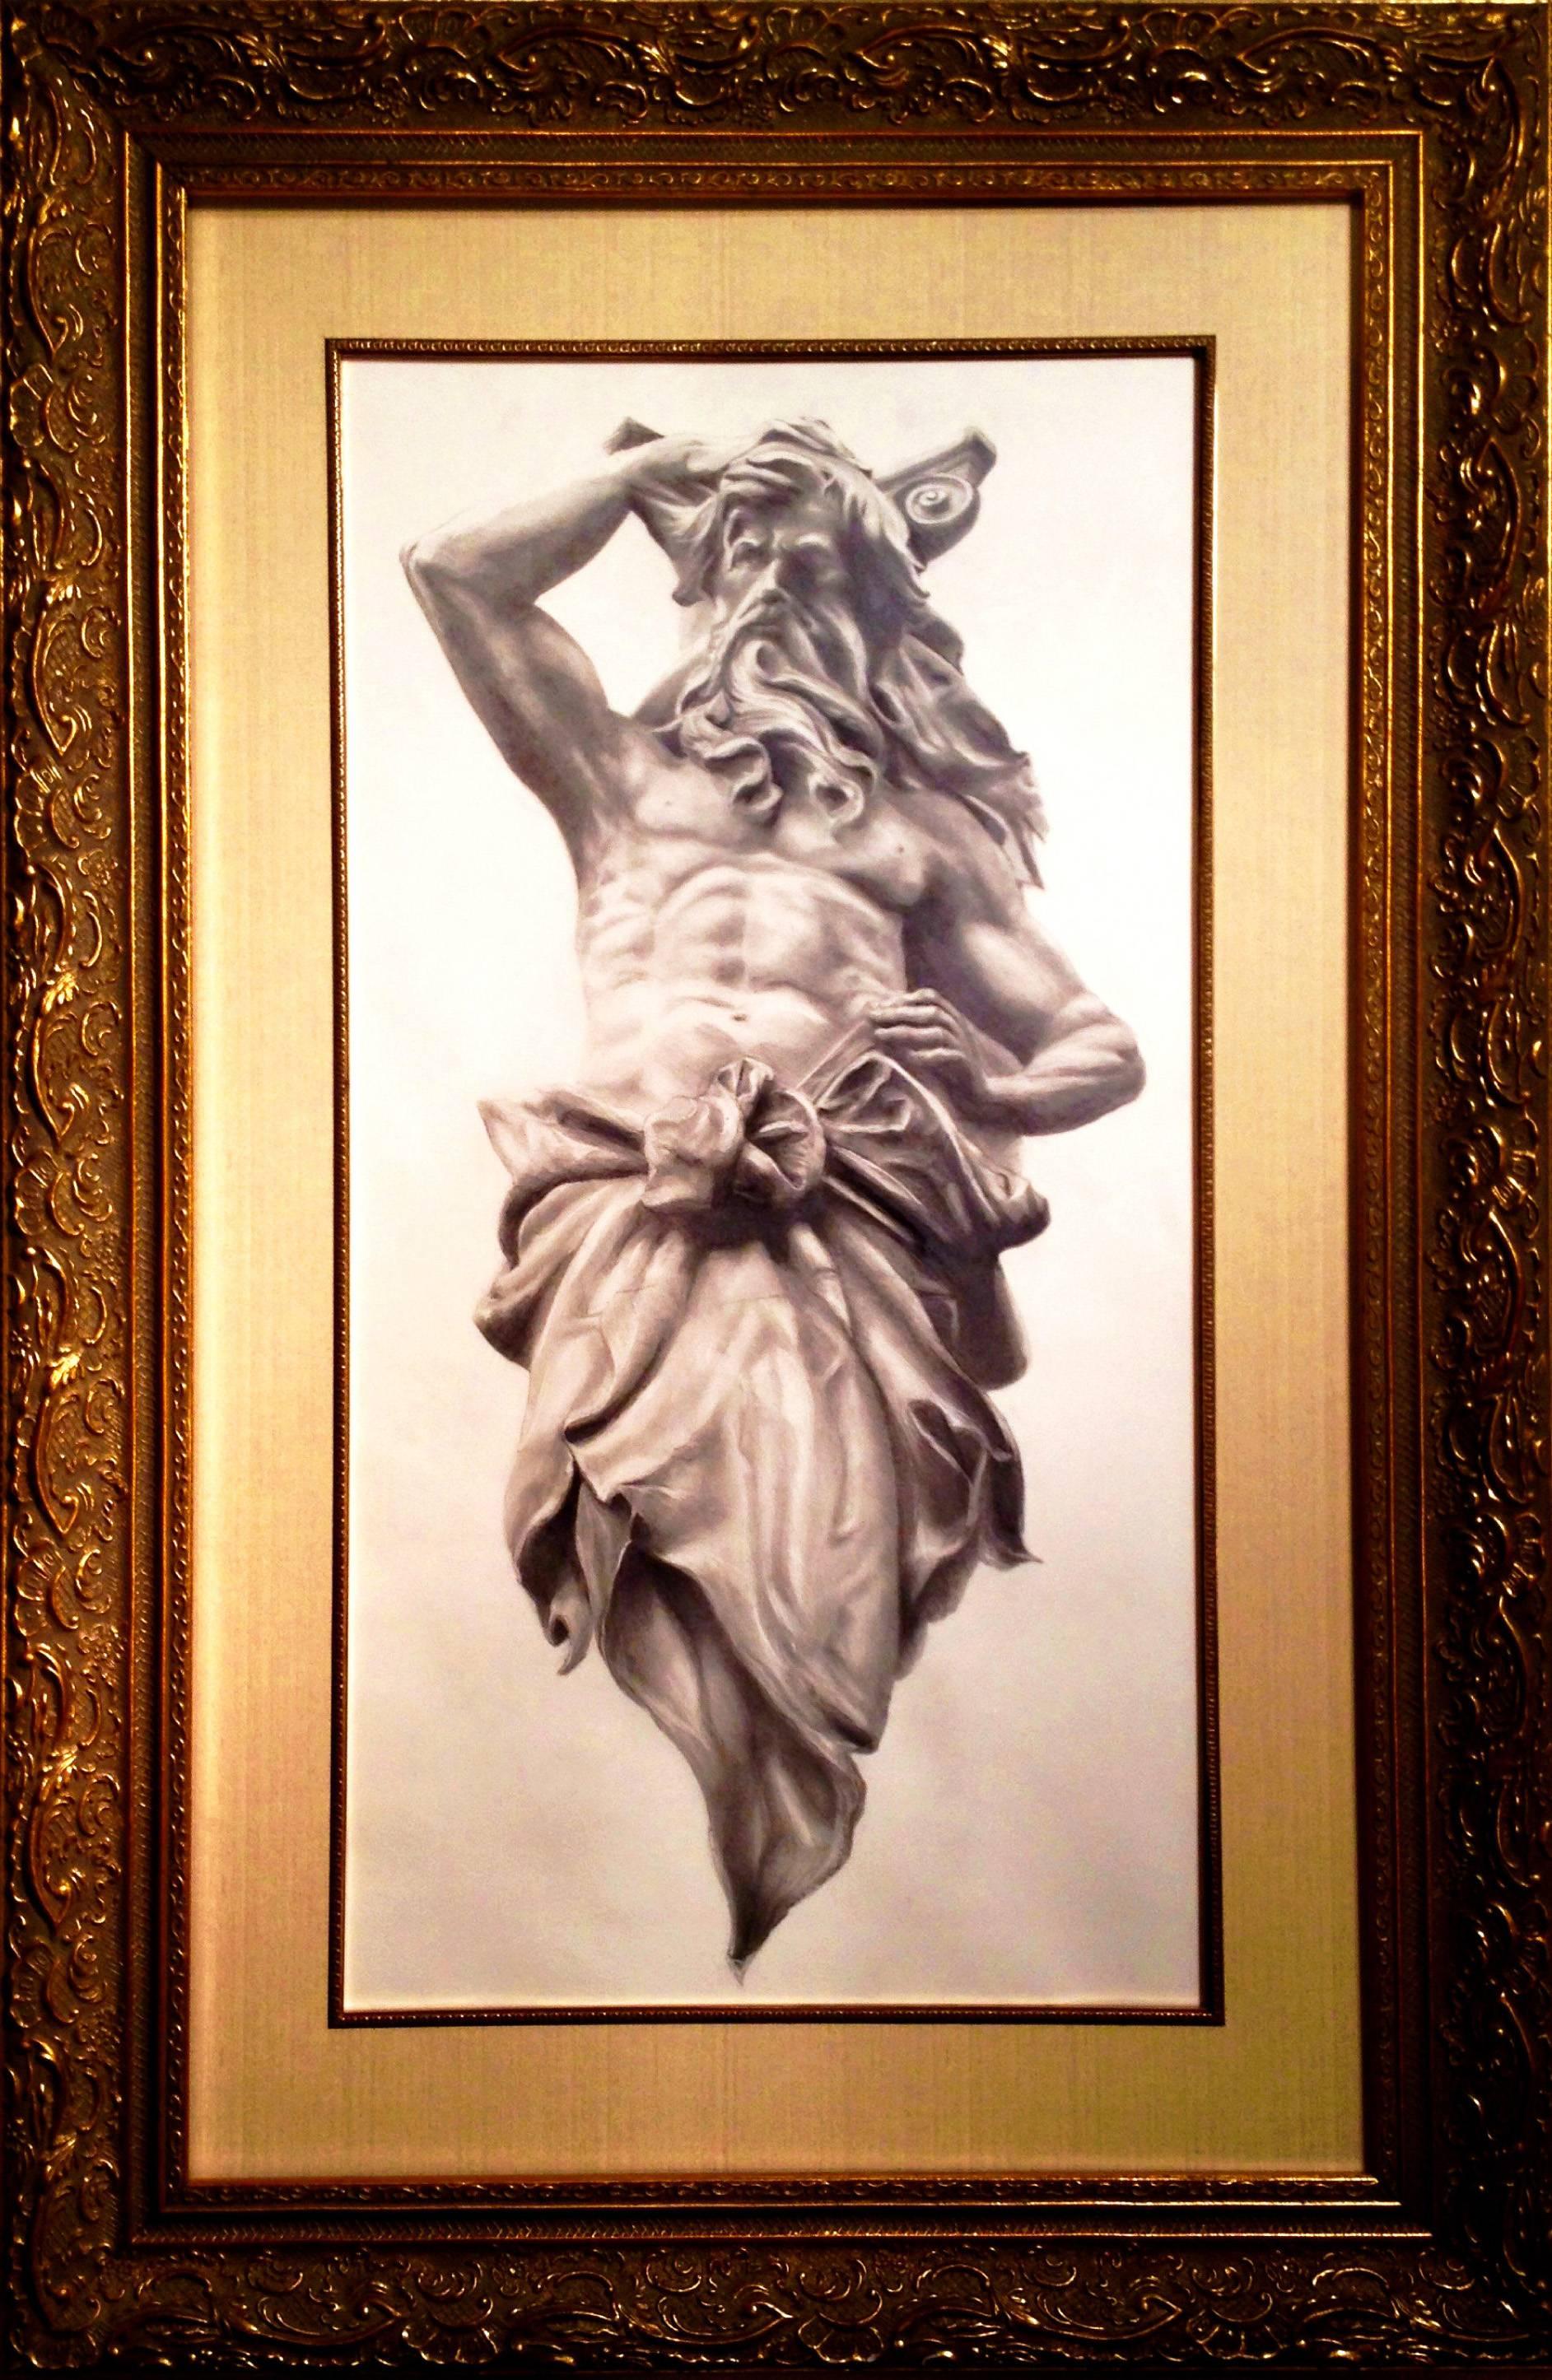 Larry Aarons works in graphite to render realistic portrayals of stoic and dignified figures. Aarons saw this arresting figure on a stroll through the city of Budapest. The graphite drawing is the latest in Aarons’ new Myths of Man series: Gods,